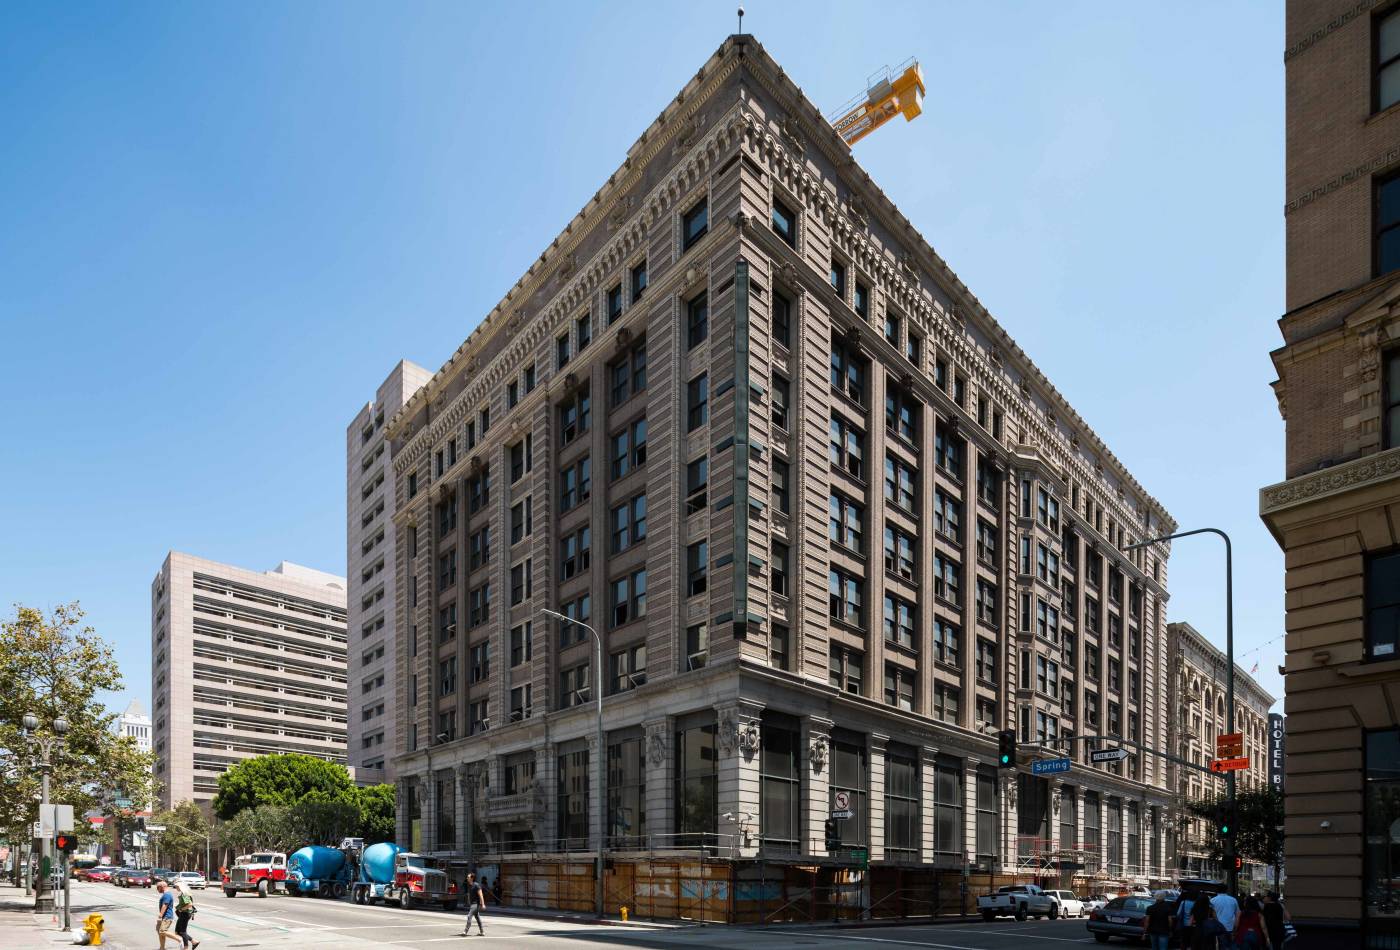 This ten-story, Beaux-Arts style building was originally a bank, constructed in 1903 for Herman W. Hellman, a German-born financier and businessman who became one of Los Angeles’ wealthiest residents. 